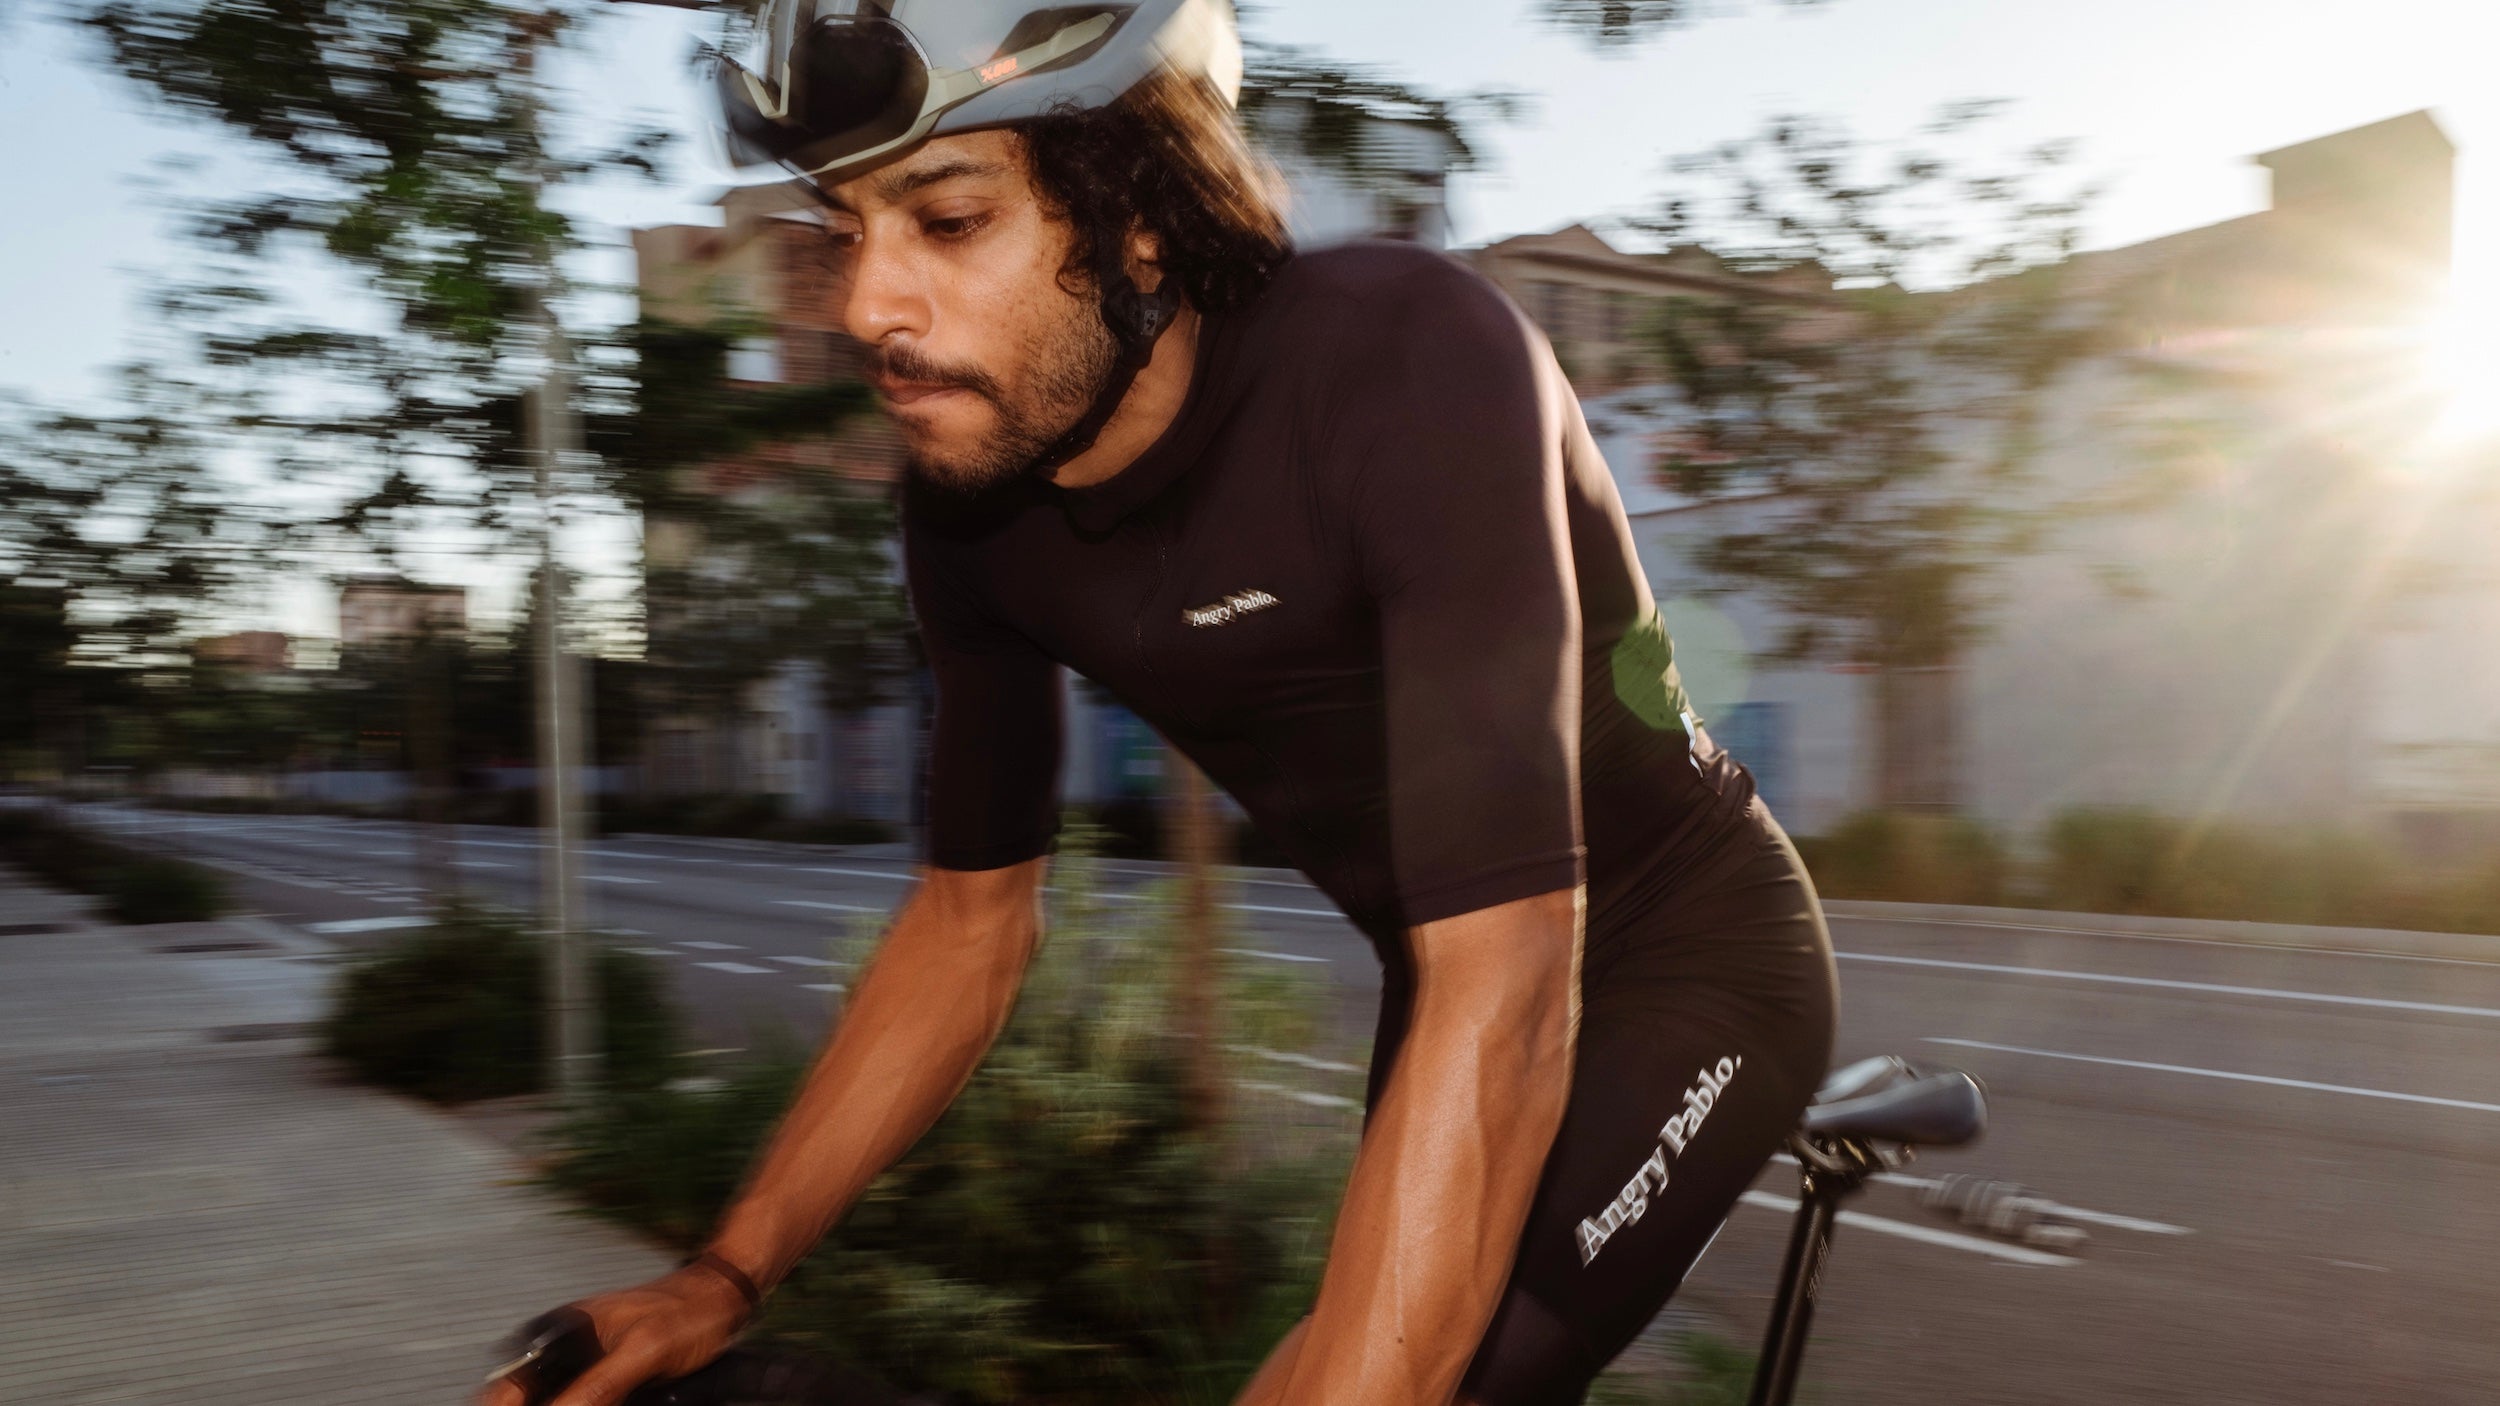 A cyclist wearing Angry Pablo clothing riding in the evening